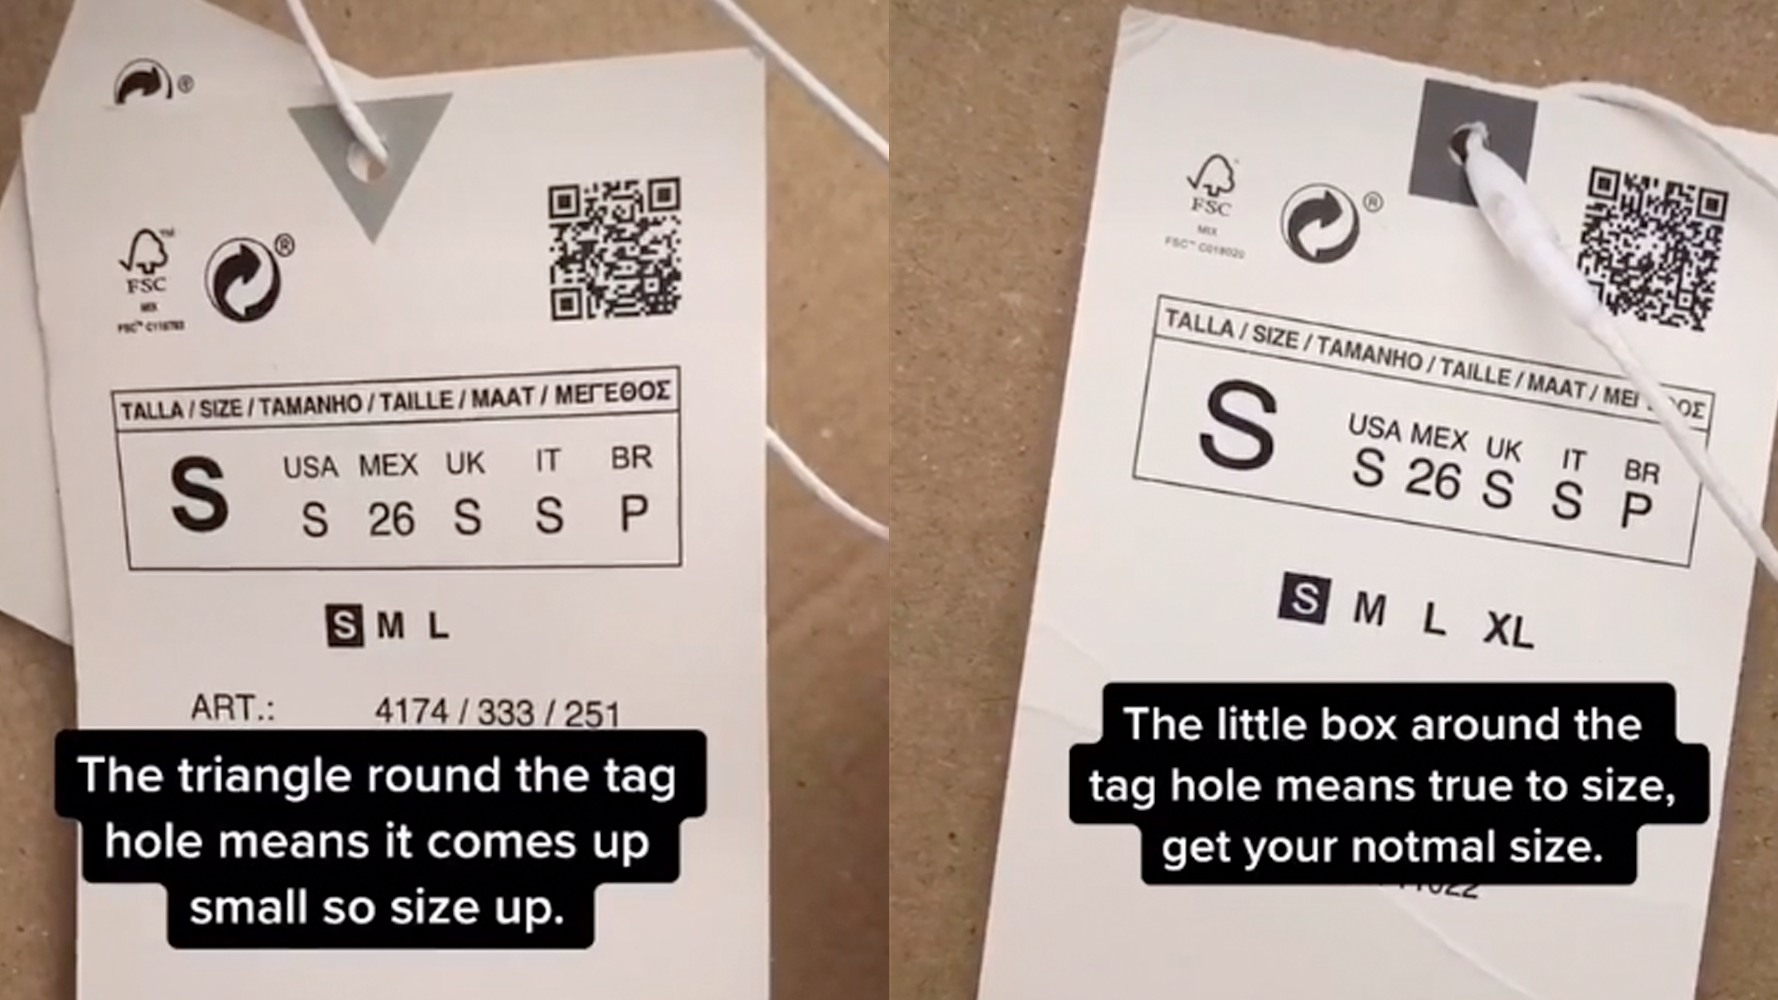 Zara employees share 'hidden meaning' behind symbols on clothing